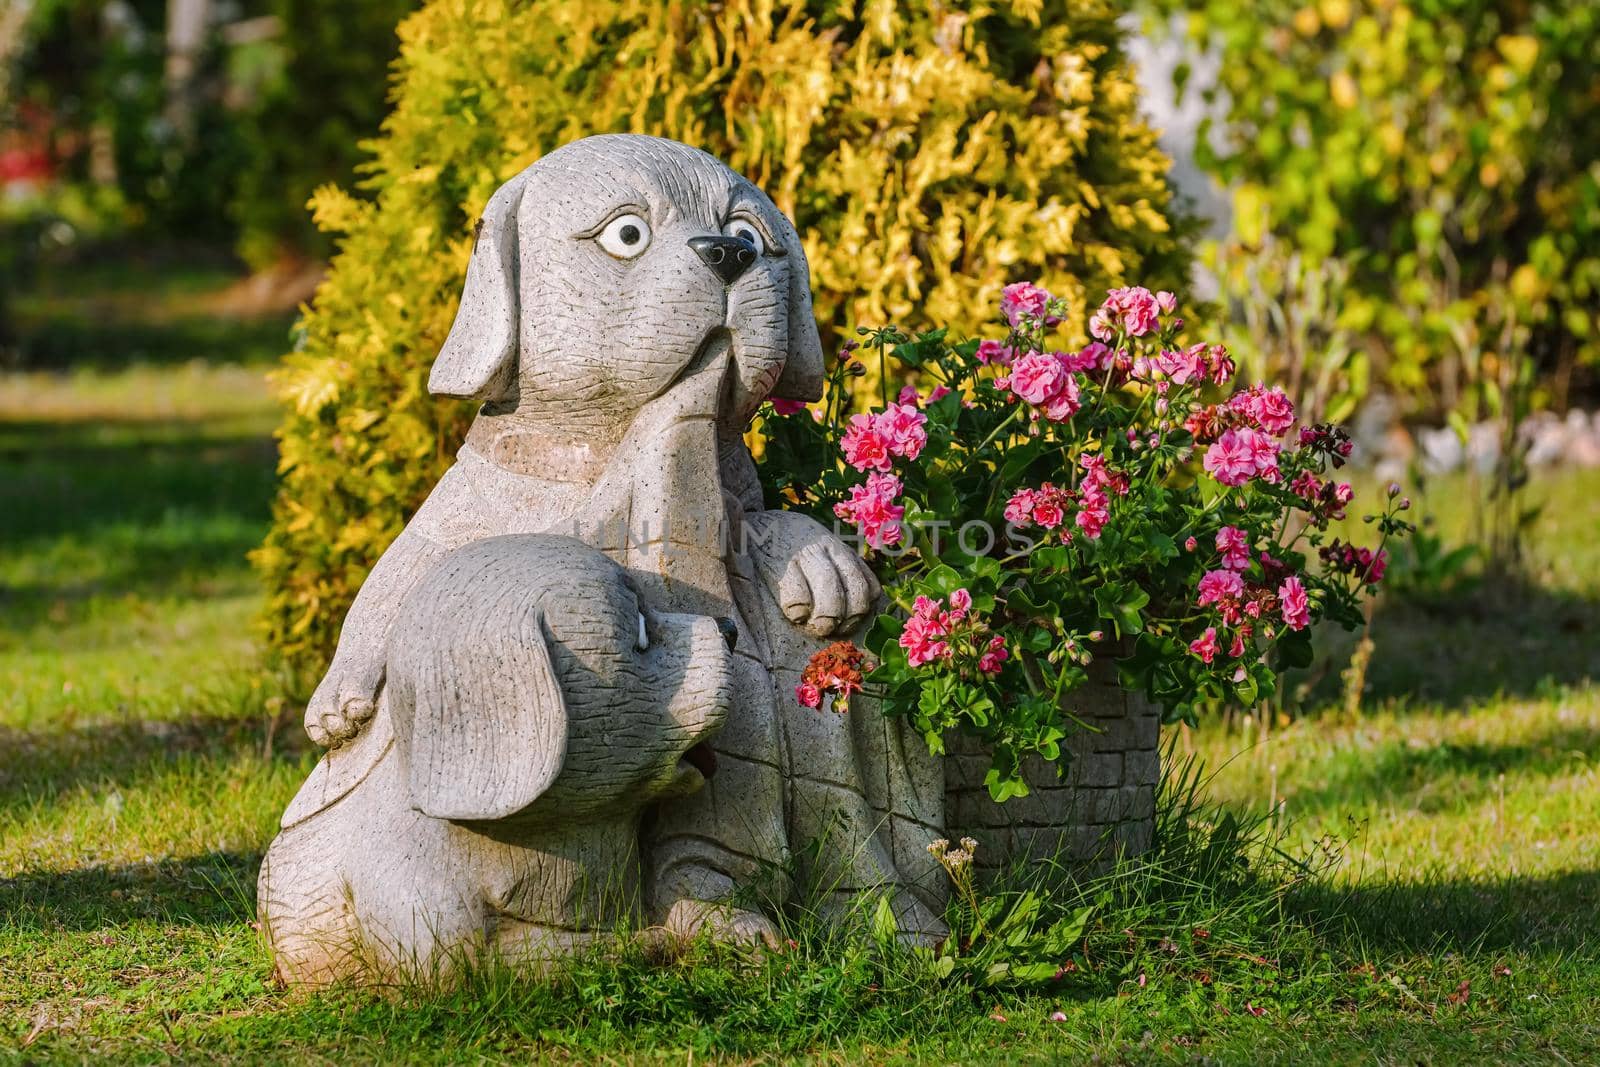 Figurine of a dog in the garden